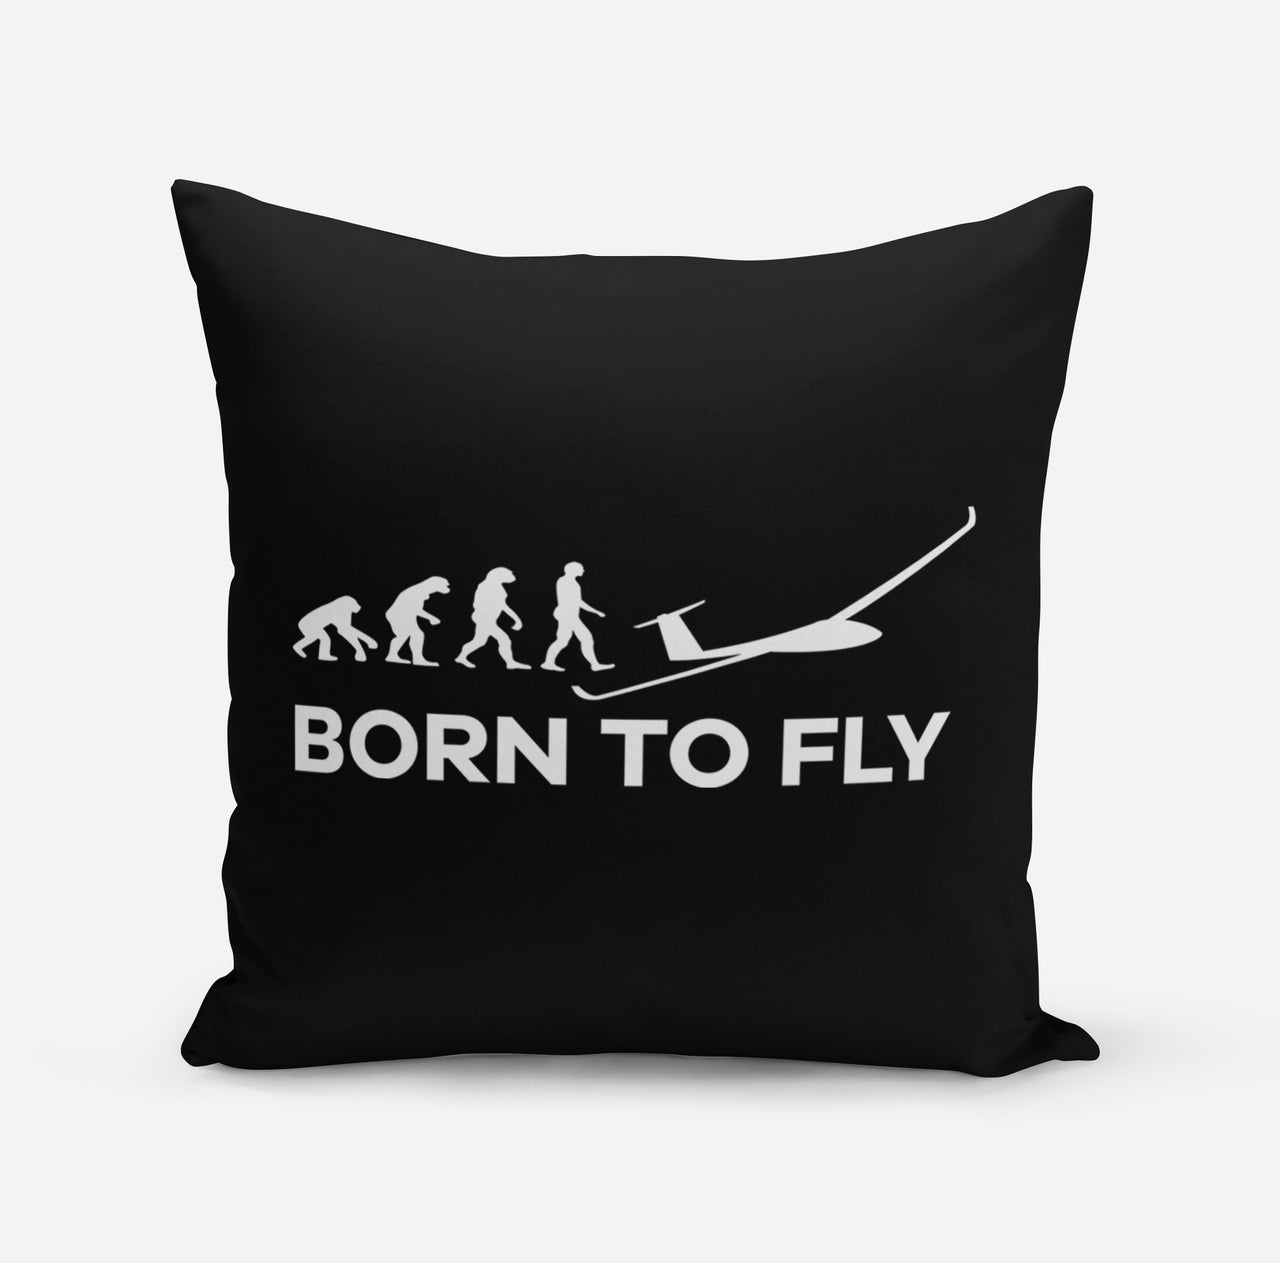 Born To Fly Glider Designed Pillows